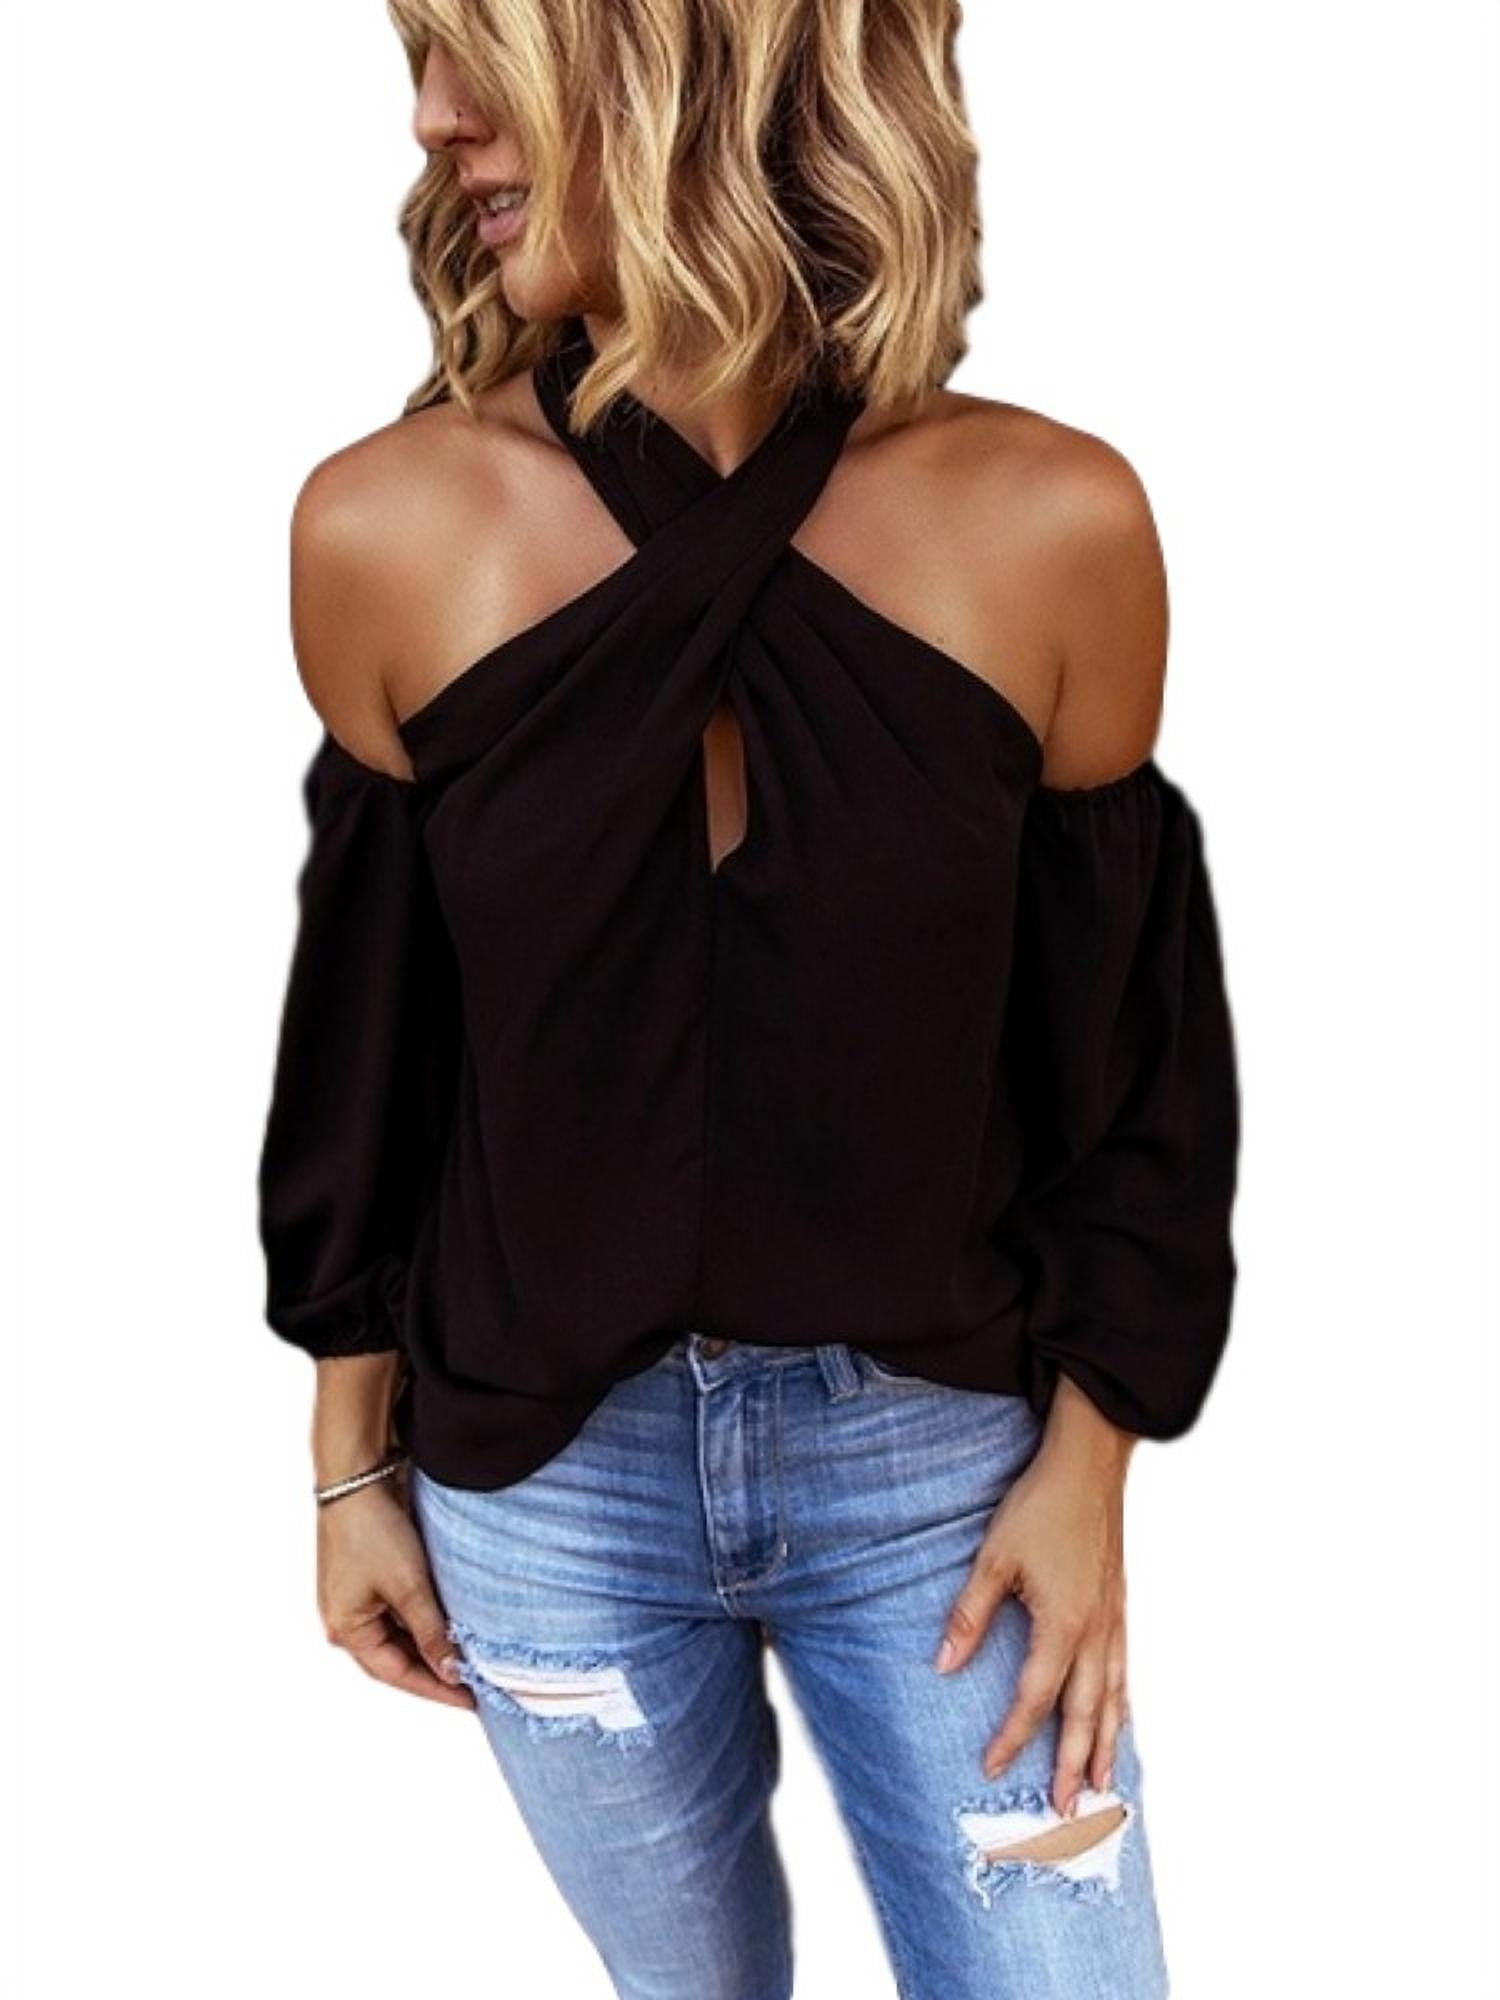 JERFER Women Fashion Casual Solid Off Shoulder Long Sleeve Tops Shirt Blouse